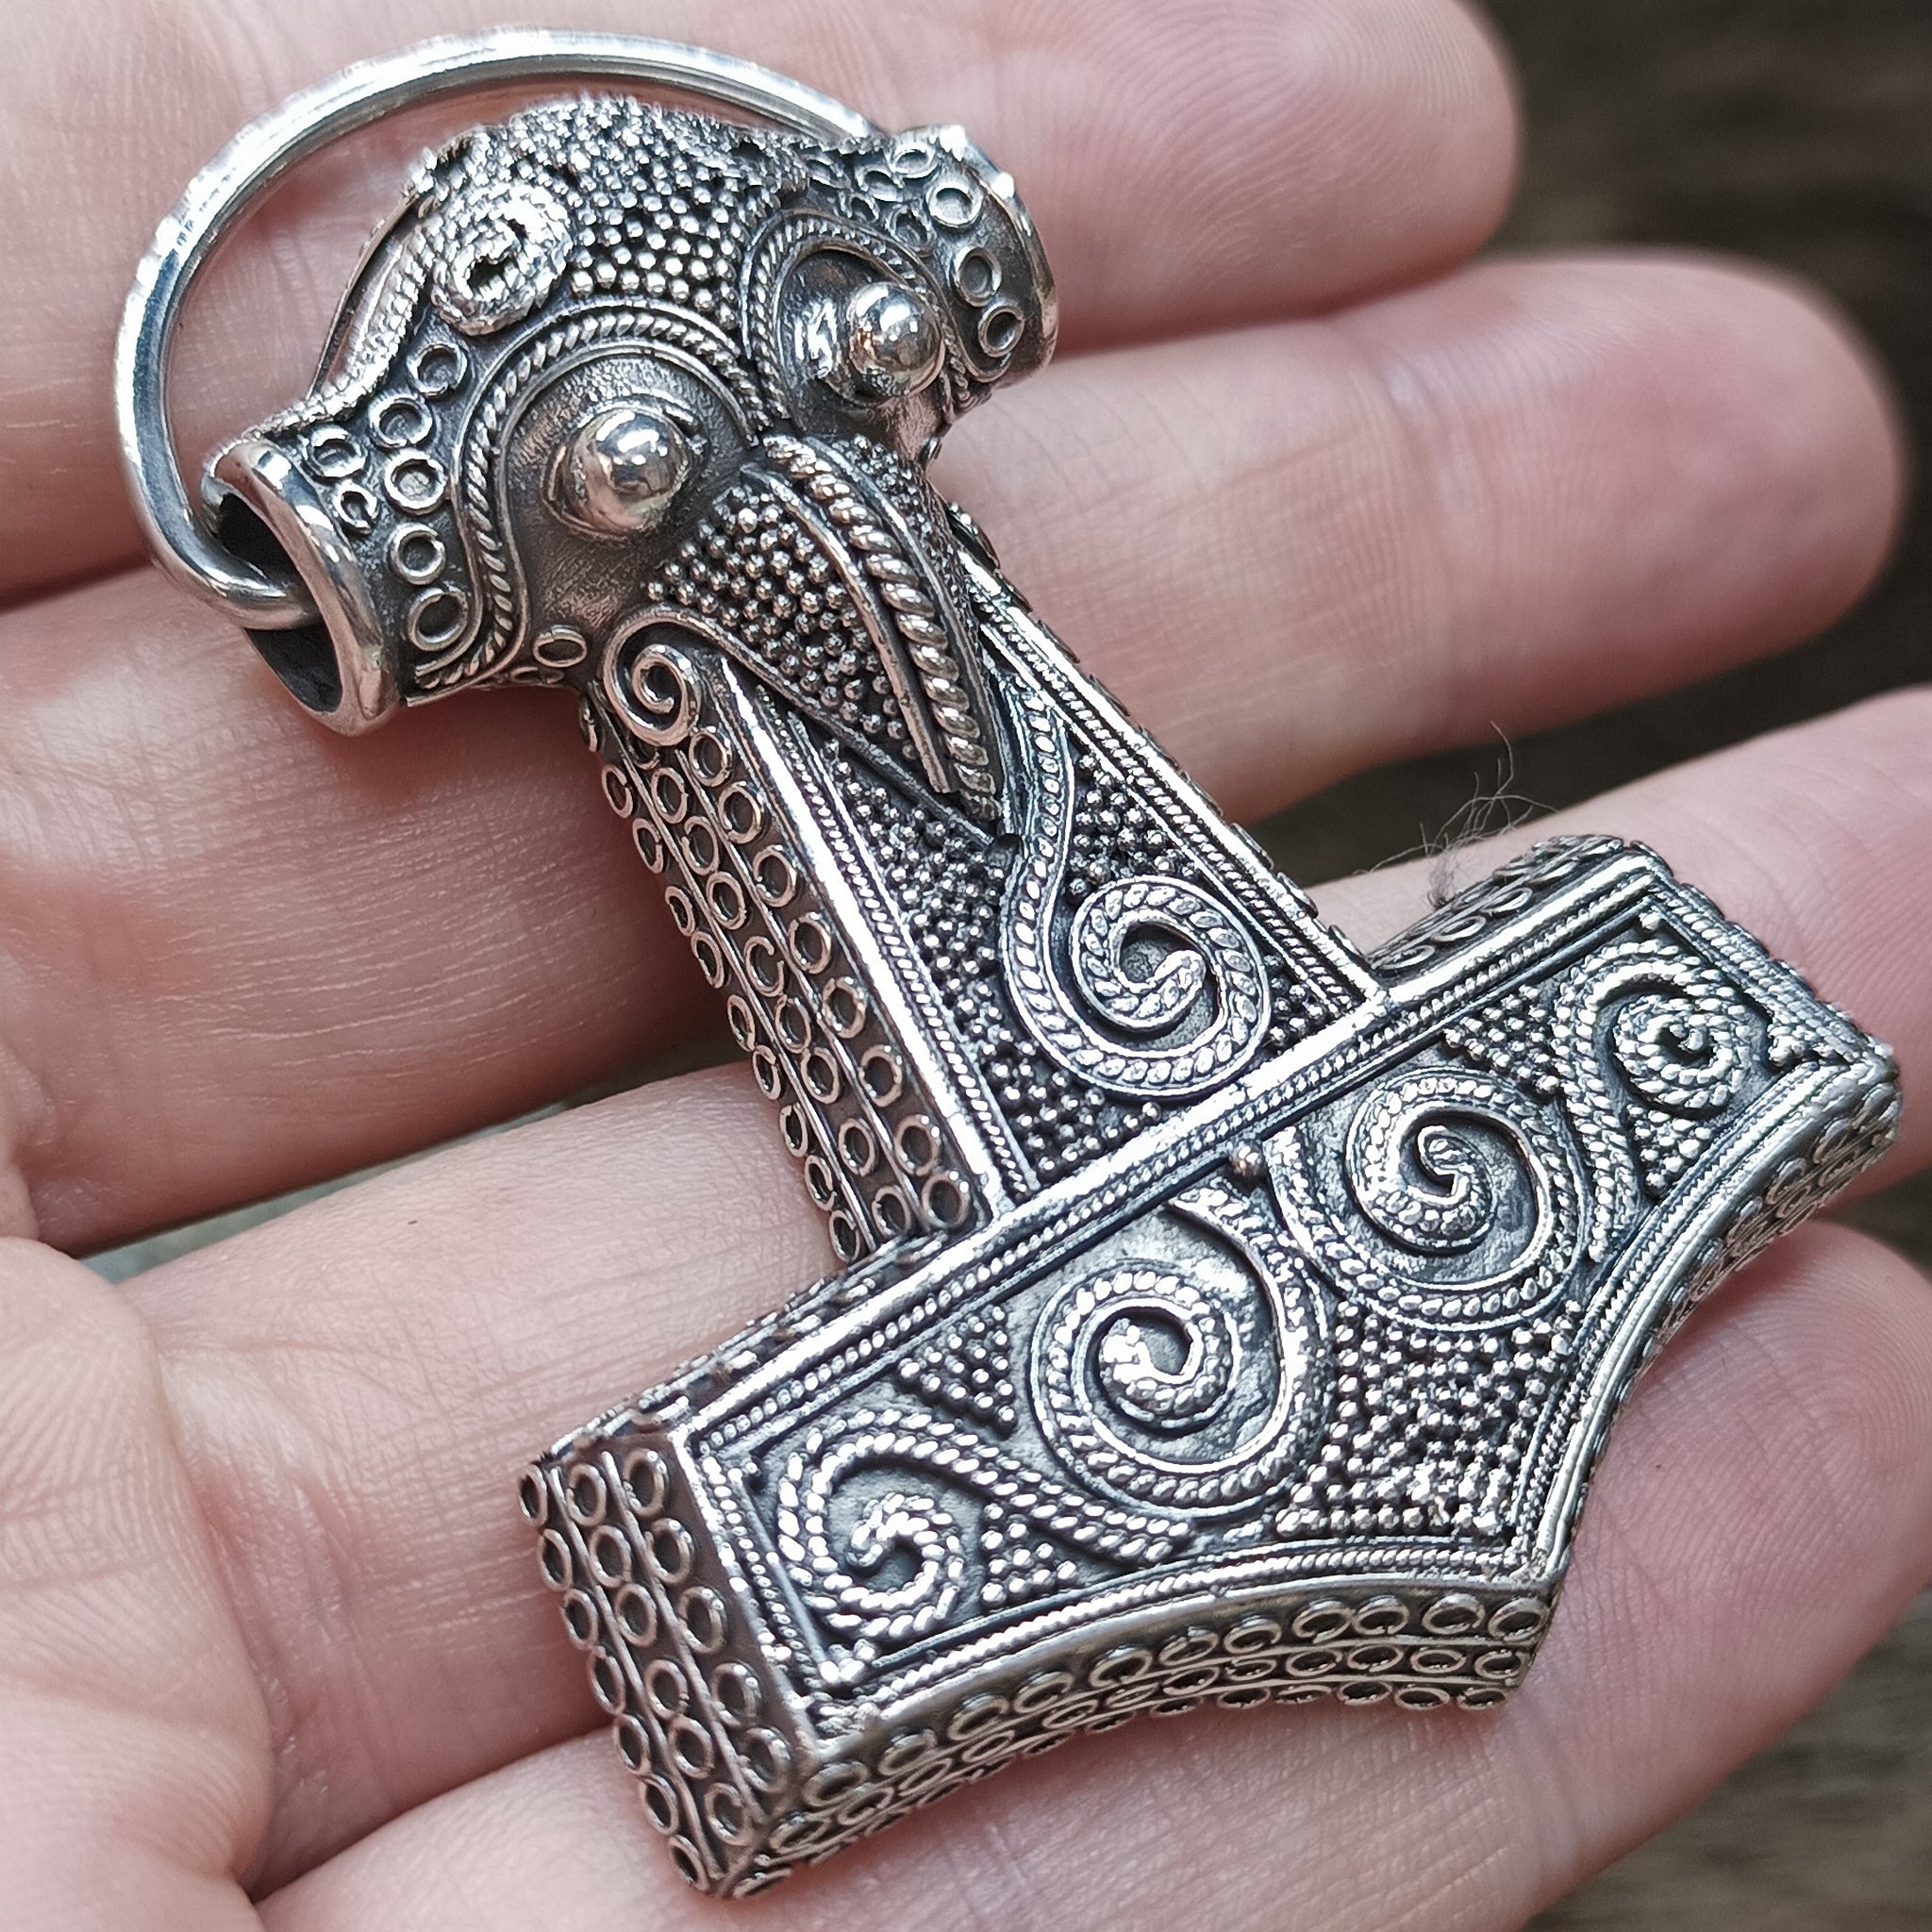 Large Silver Filigree Thors Hammer Pendant Replica from Kabara with Ring - On Hand - Angle View